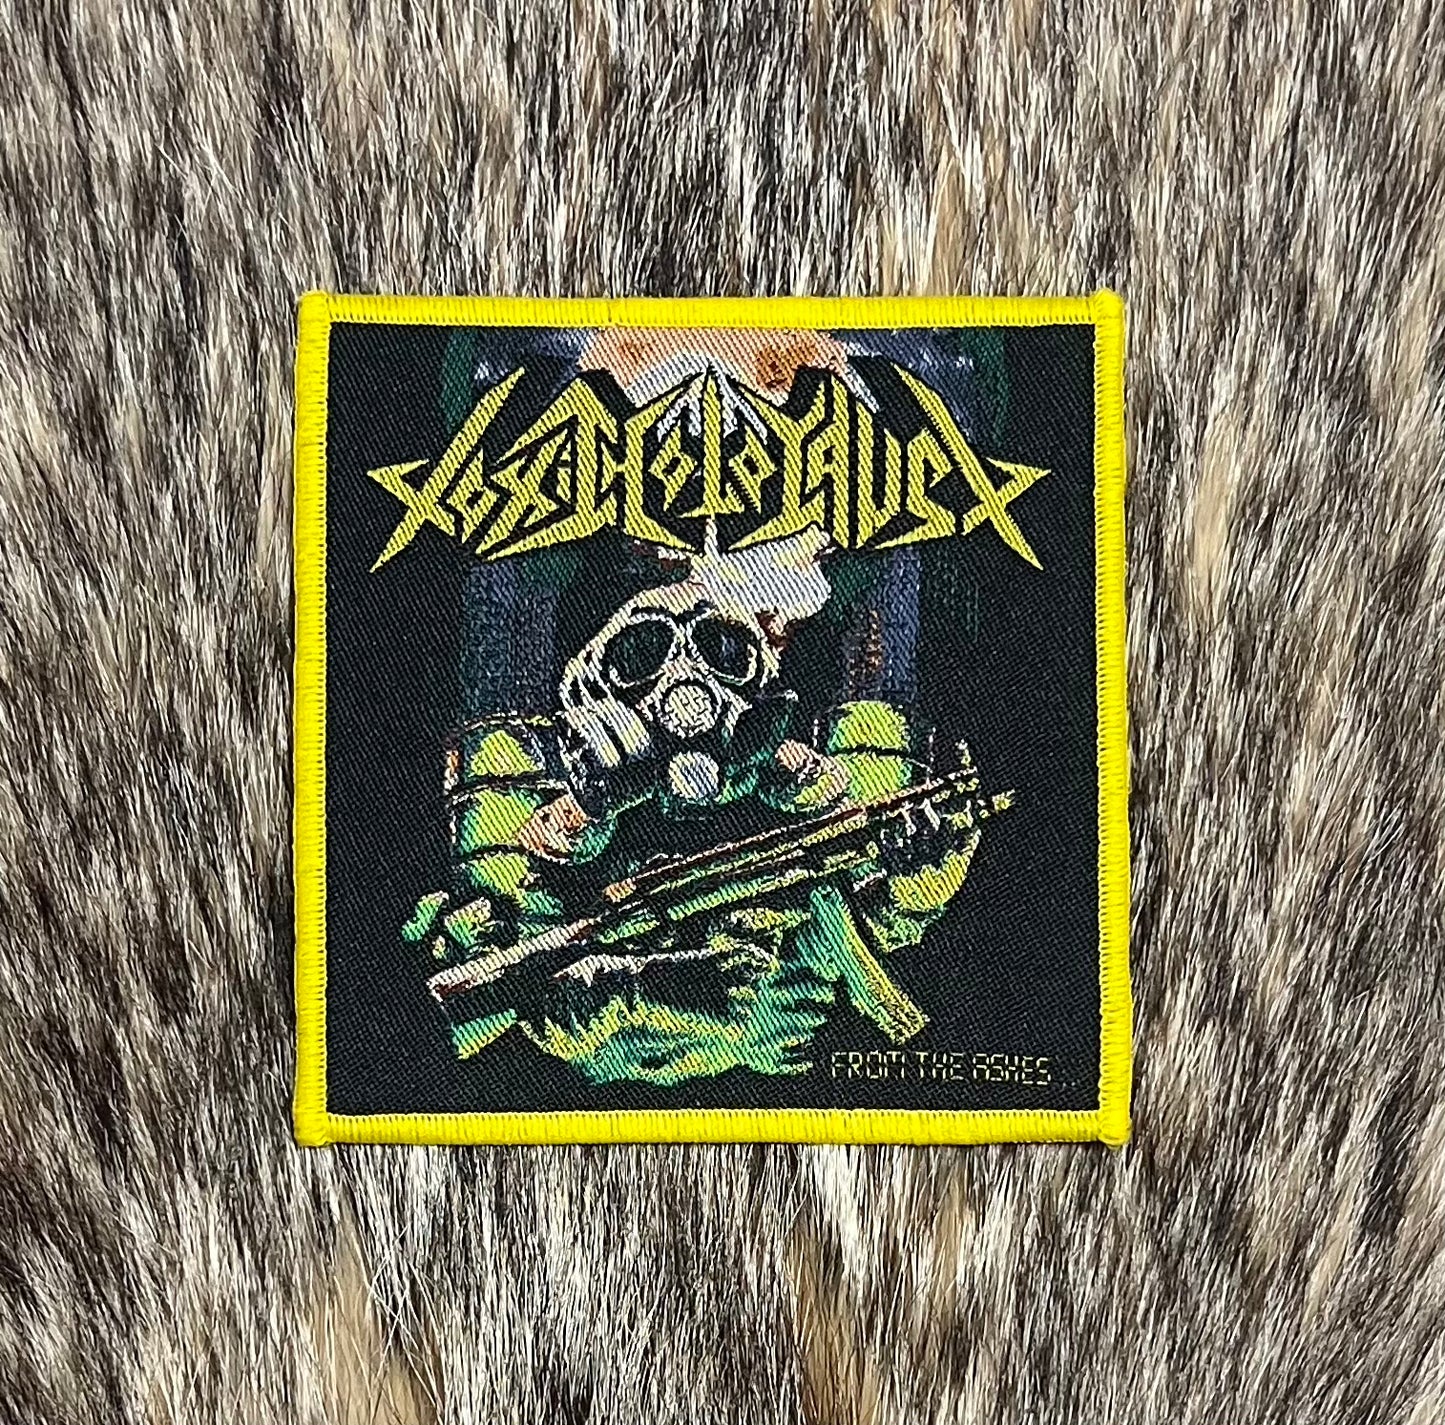 Toxic Holocaust - From The Ashes Patch